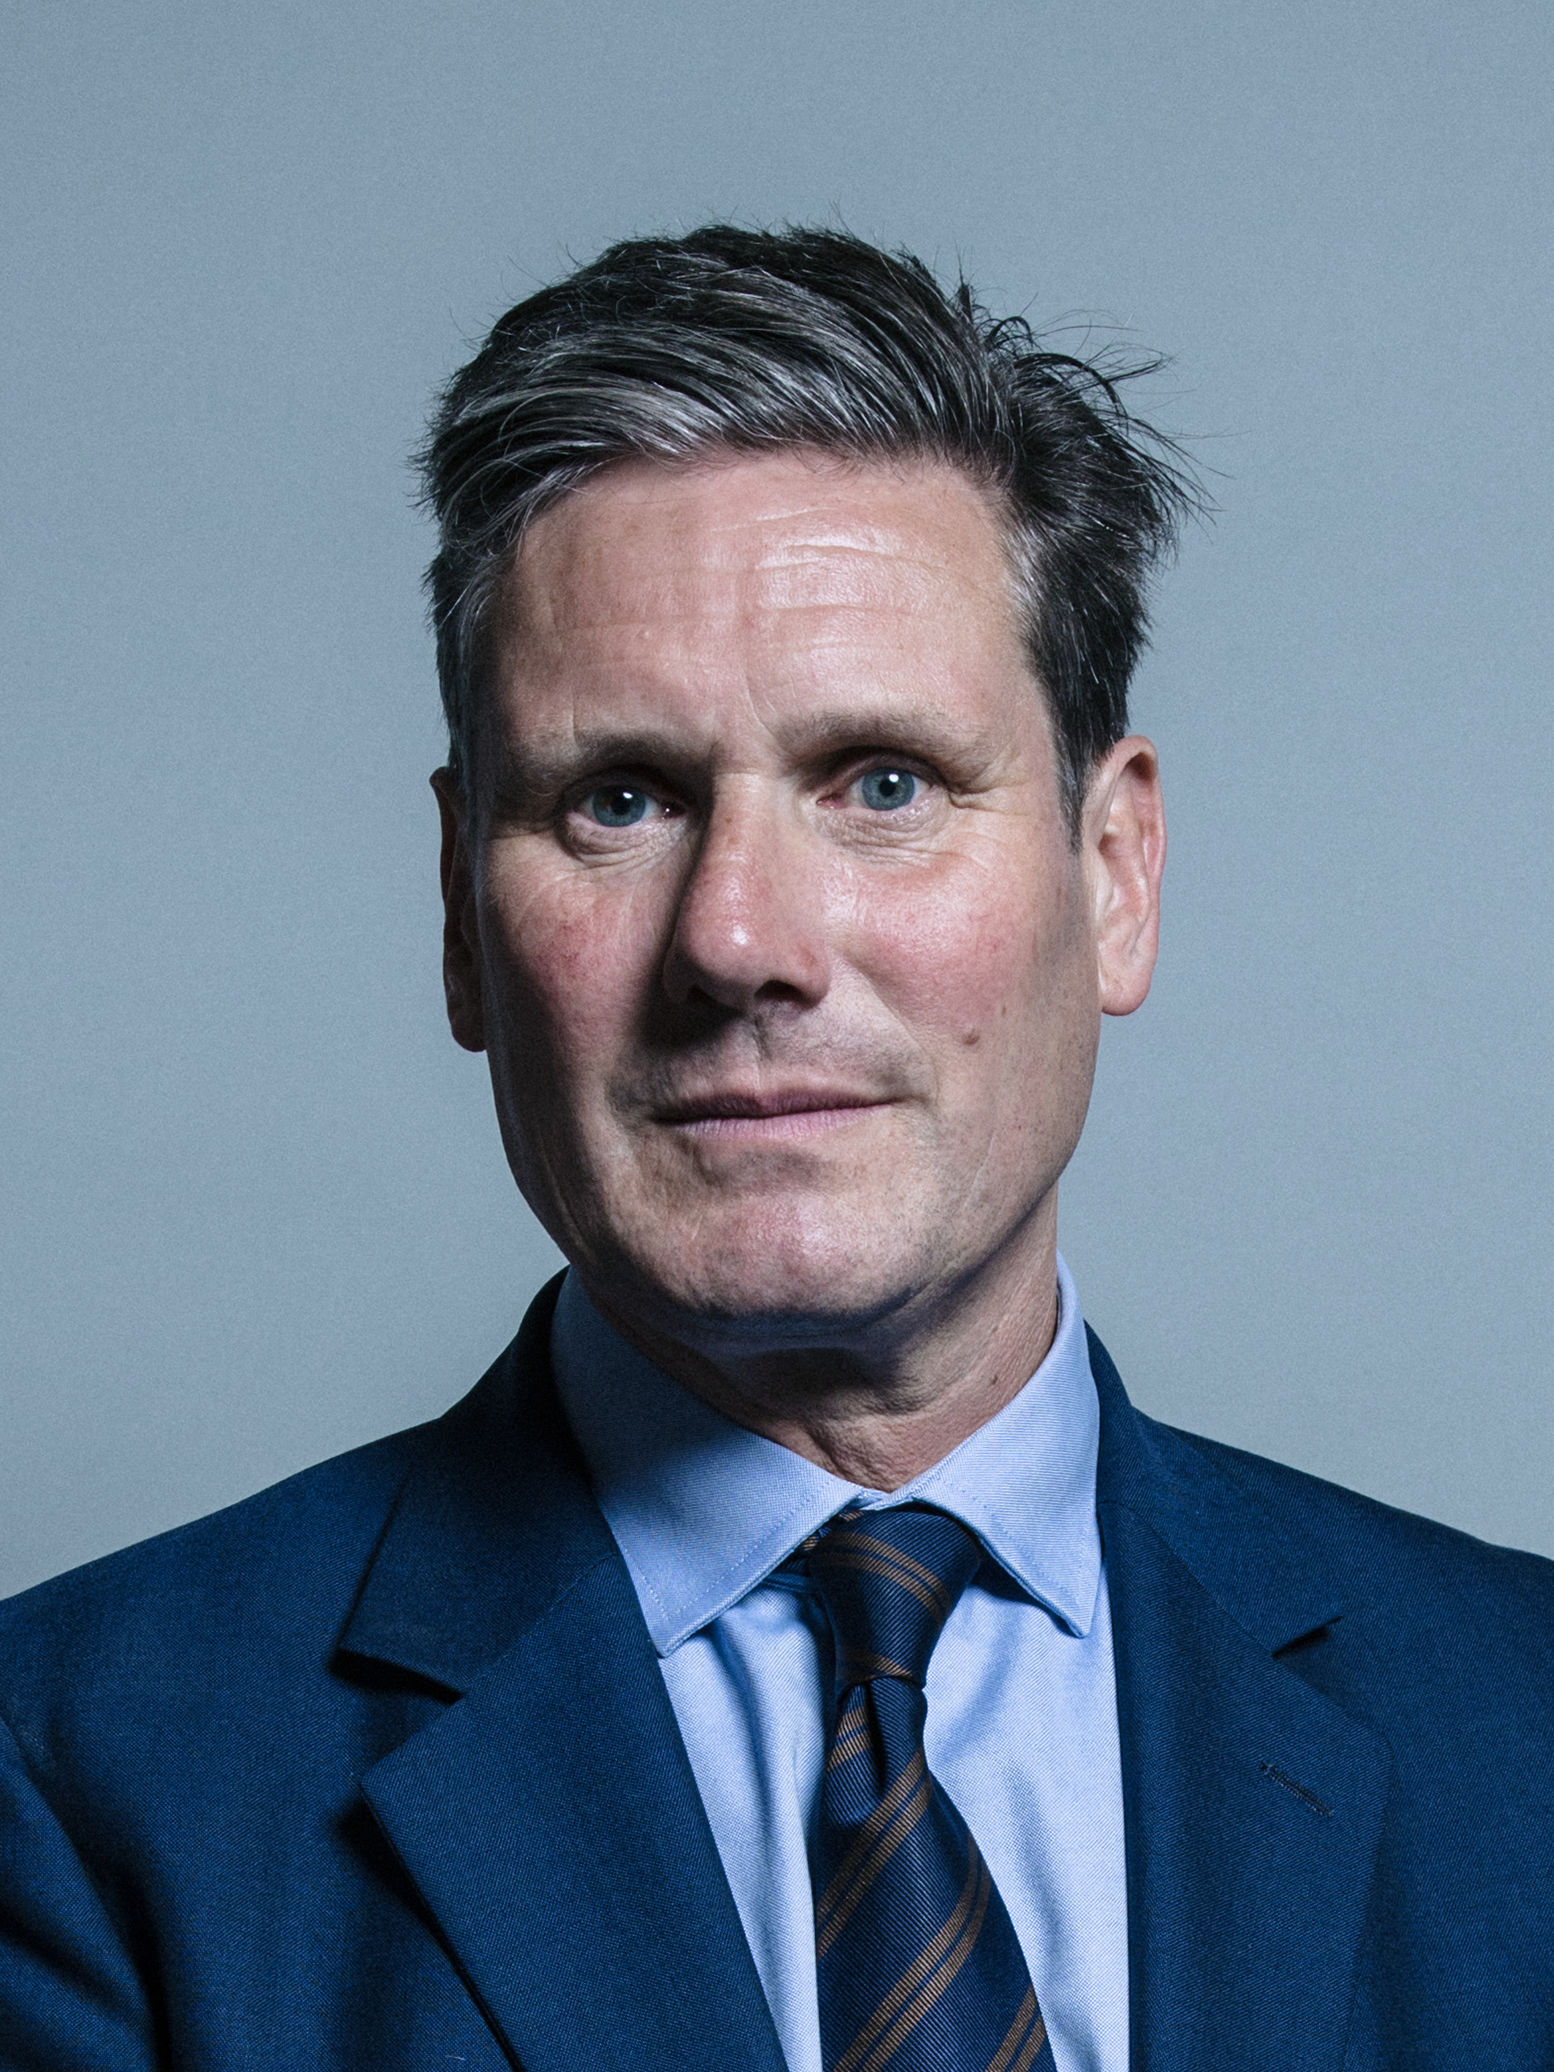 NEWS | Labour leader Sir Keir Starmer self-isolating after household member showed COVID-19 symptoms